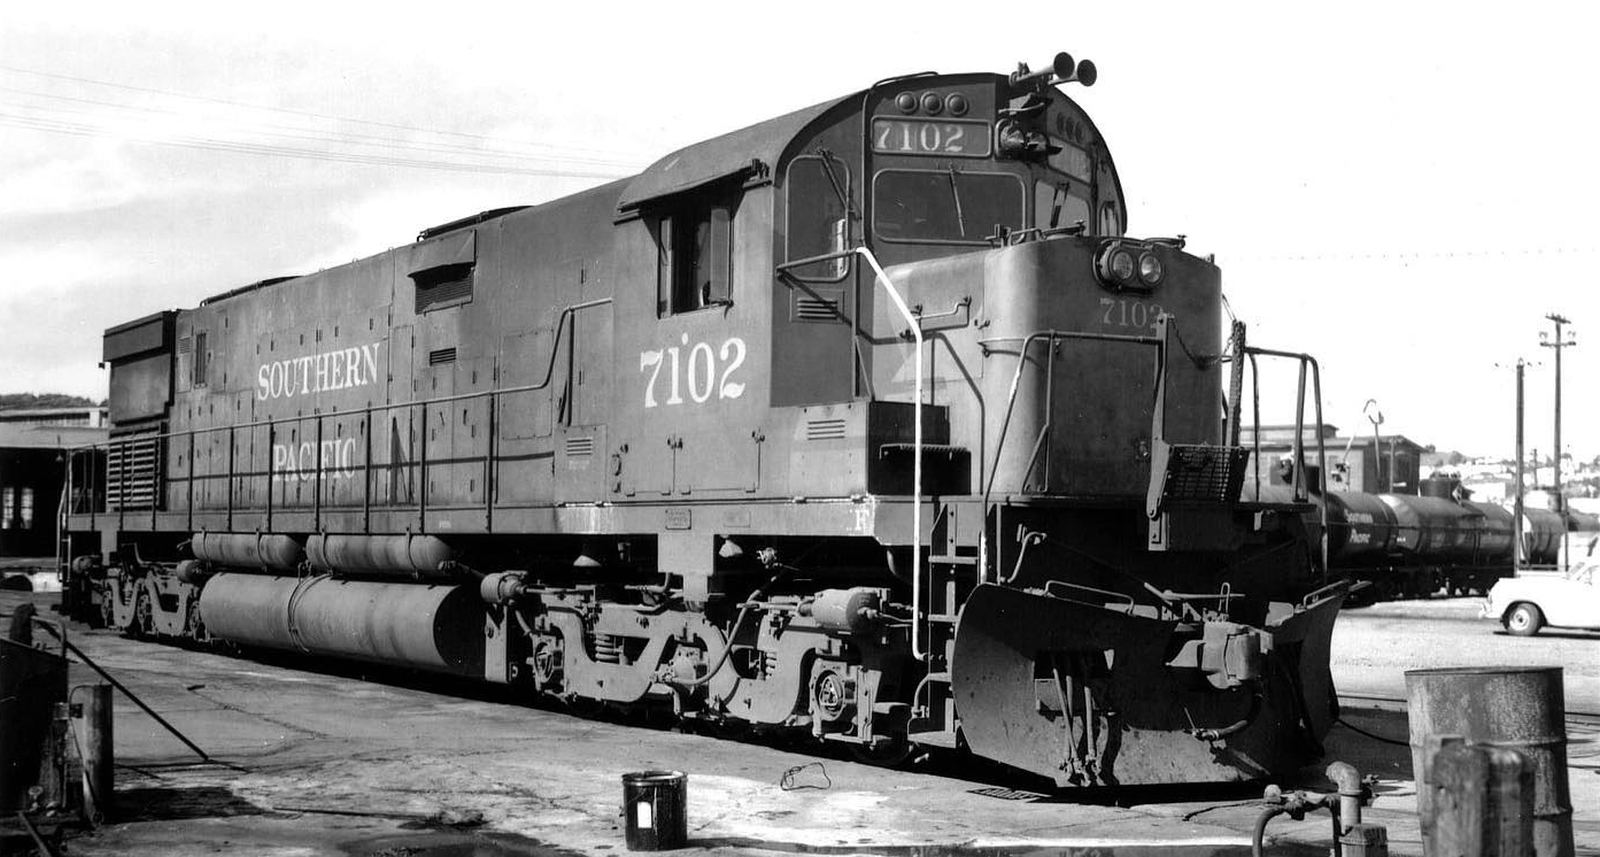 Southern Pacific Century 628 No. 7102 in July 1969 in Bayshore, California